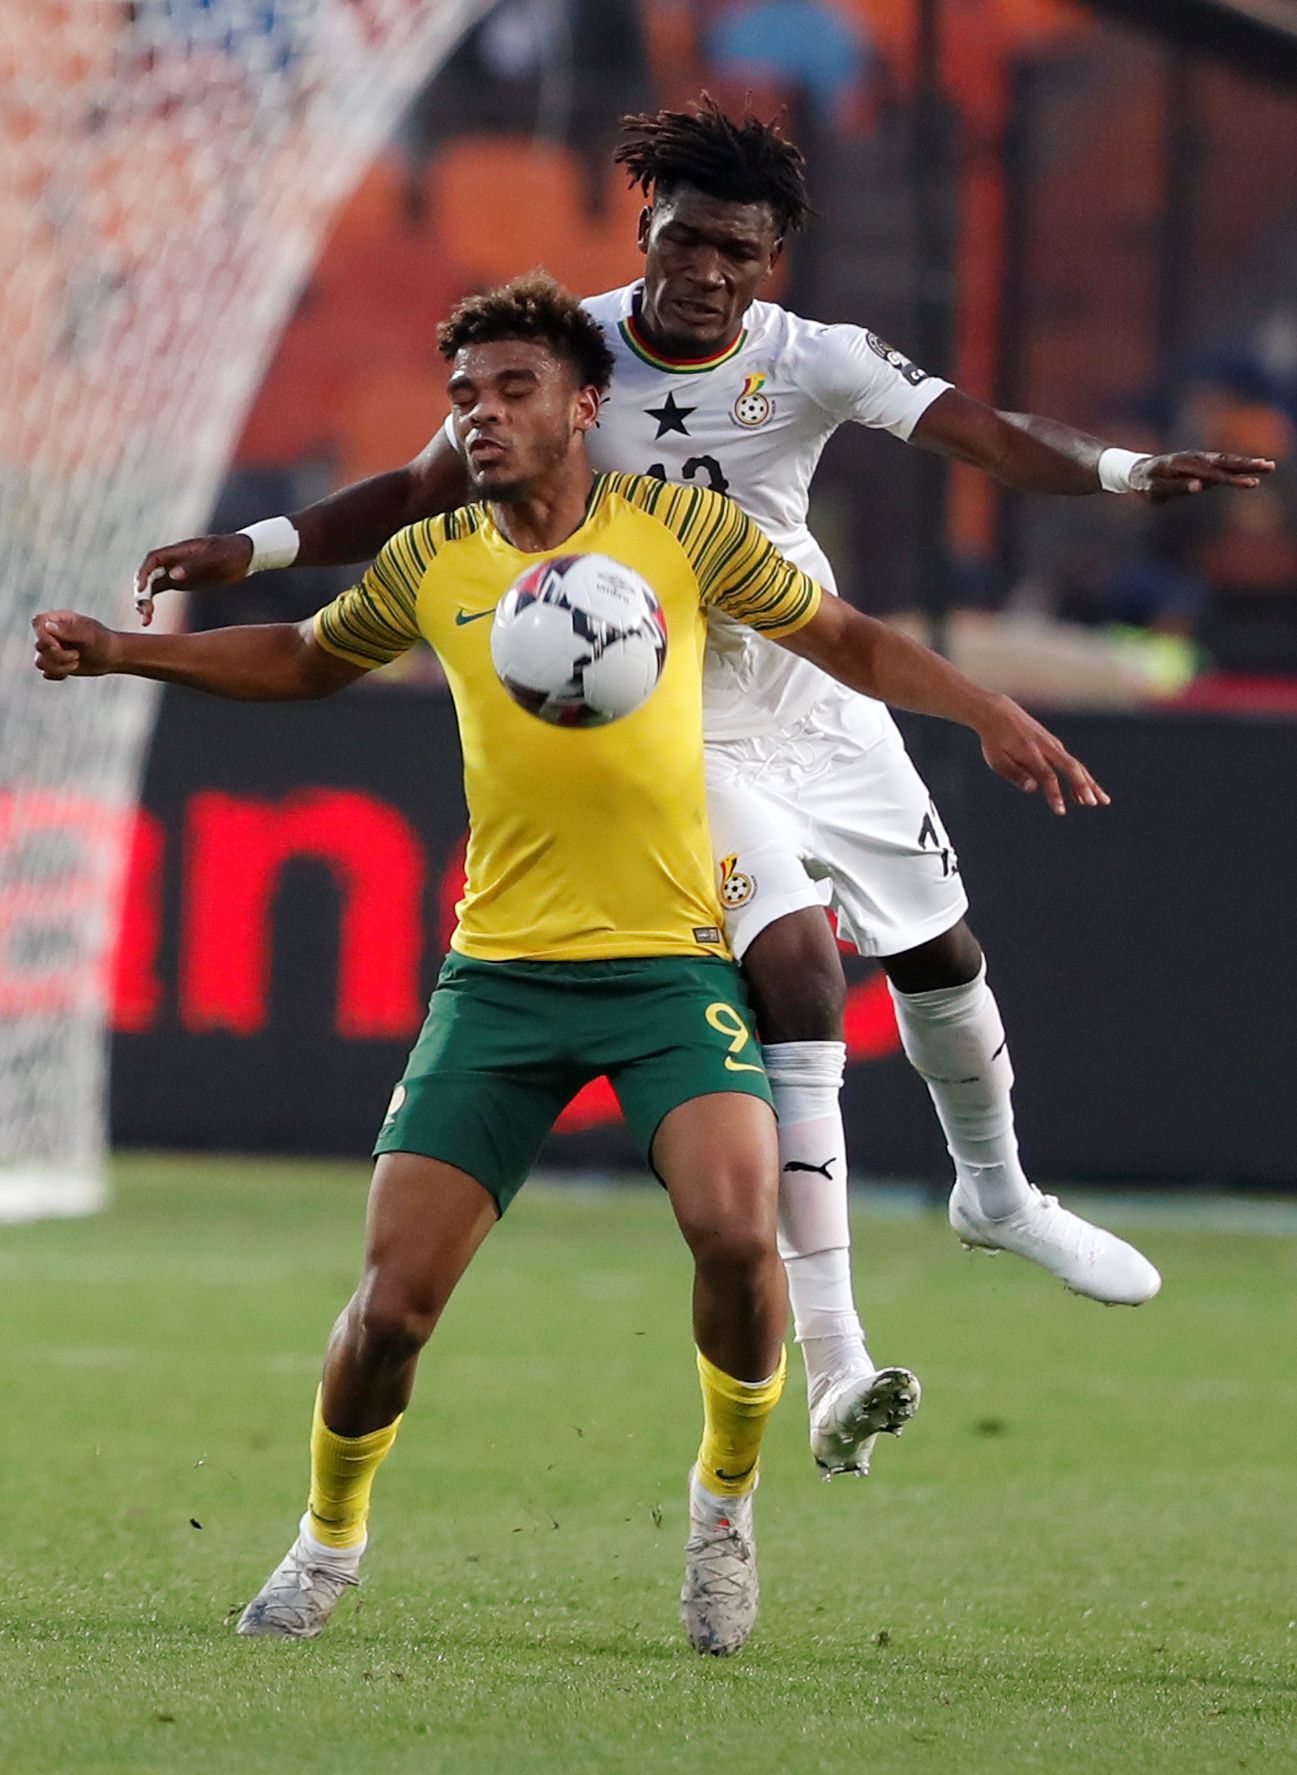 Soccer Football - Africa Under 23 Cup of Nations - Third Place Play Off - South Africa U23 v Ghana U23 - Cairo International Stadium, Cairo, Egypt - November 22, 2019    South Africa's Lyle Foster in action with Ghana's Habib Mohammed    REUTERS/Amr Abdallah Dalsh